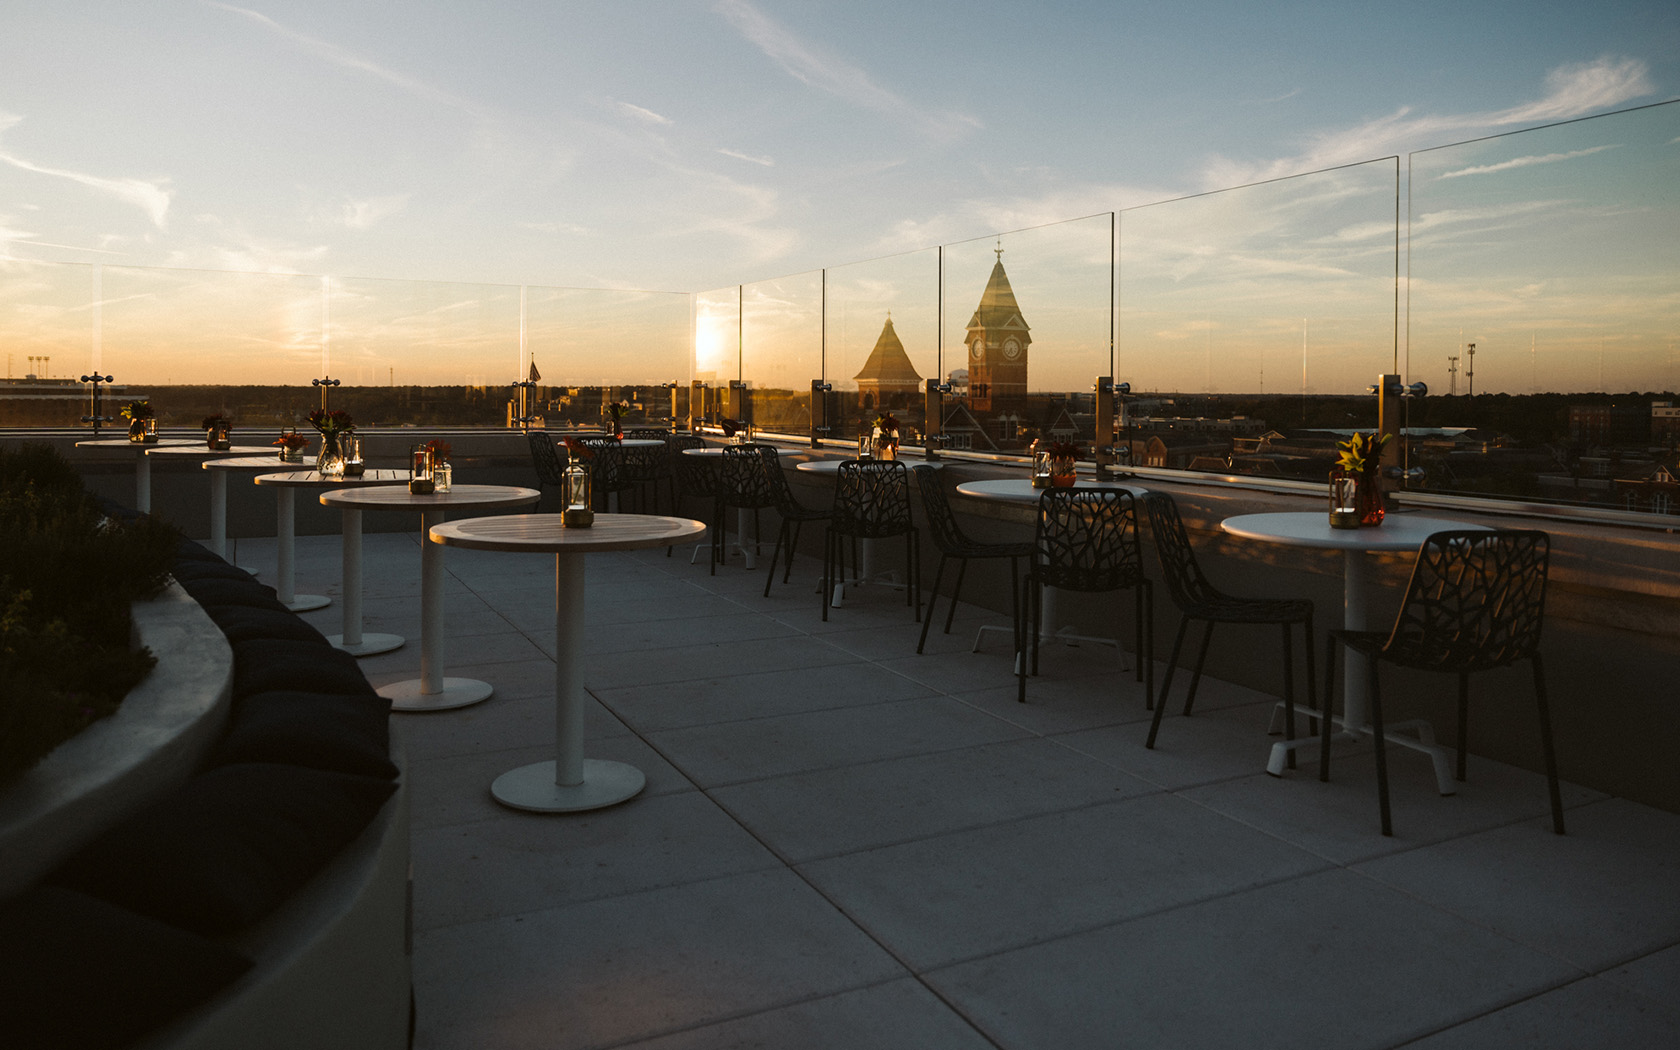 rooftop lounge tables overlooking the city at sunset